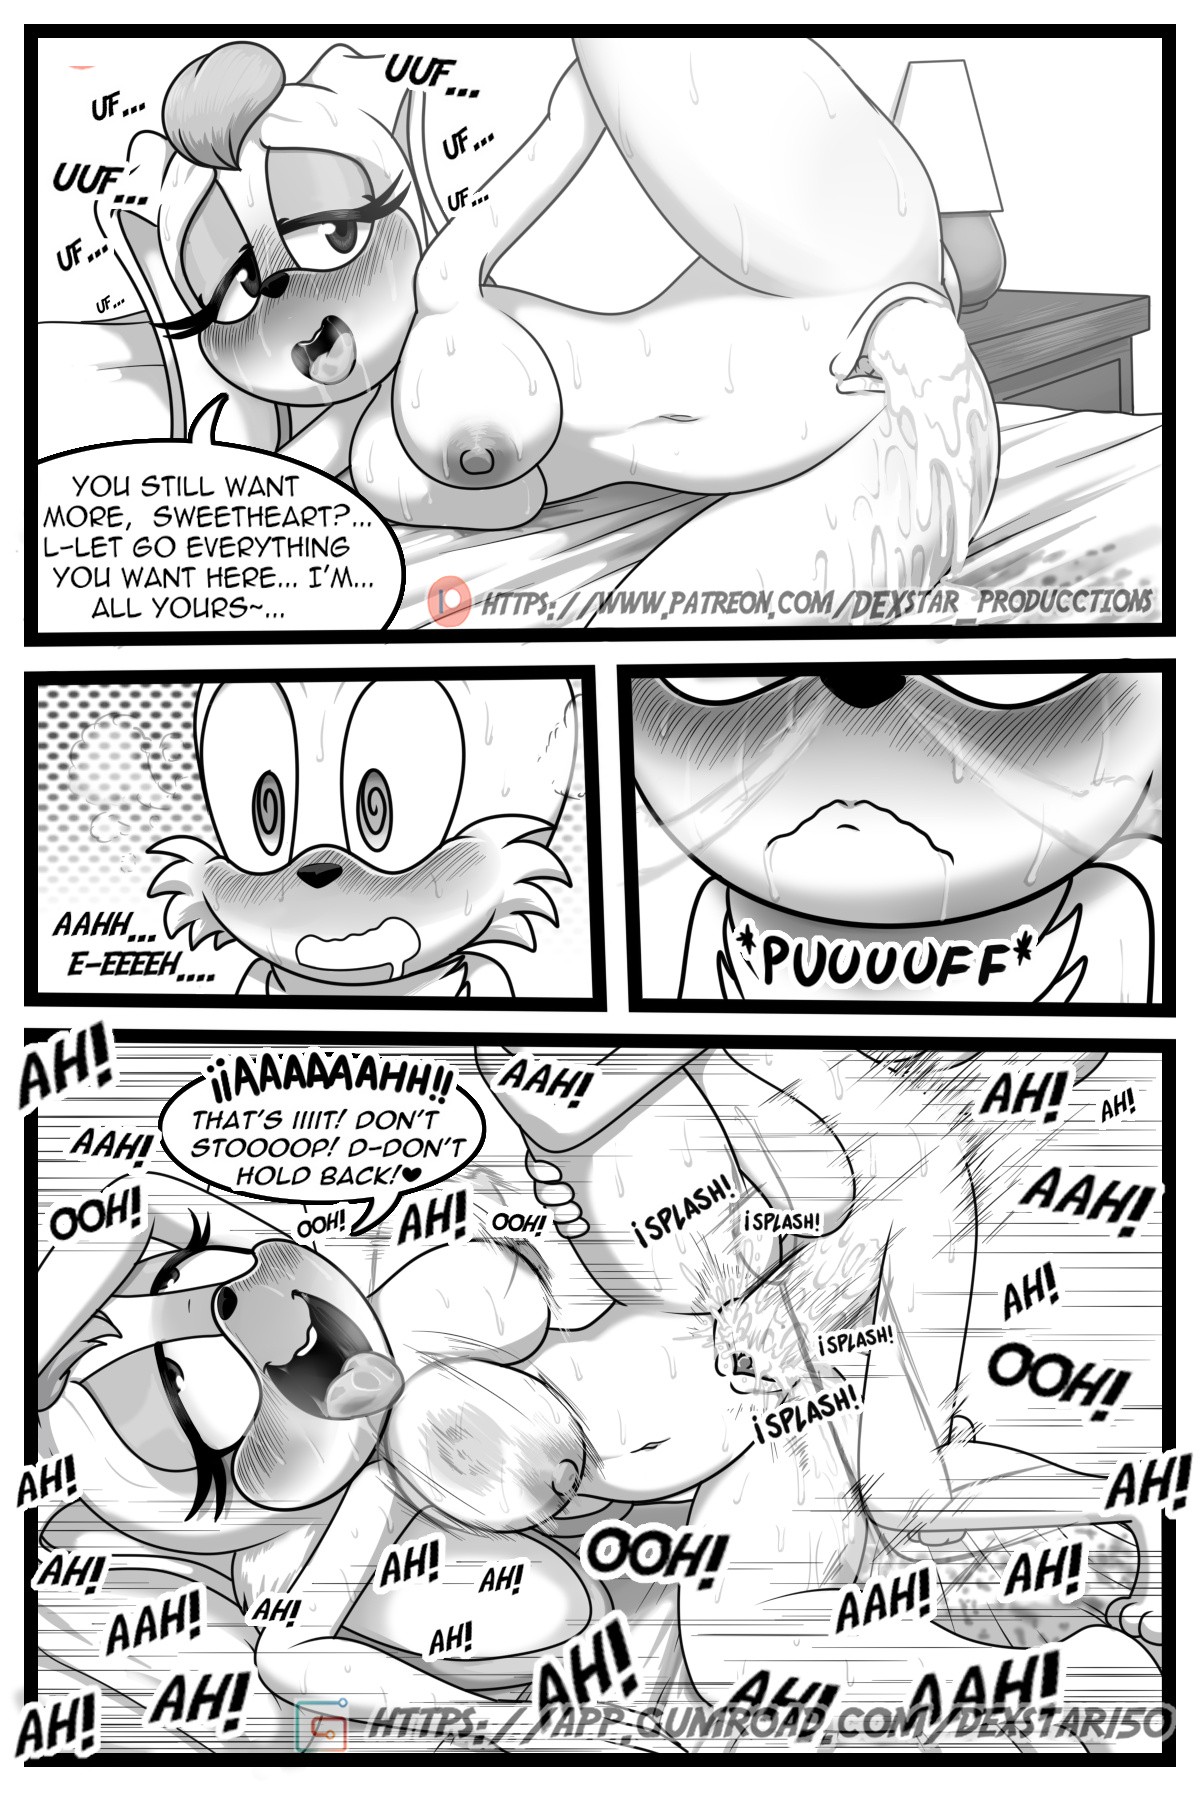 Please Fuck Me: Cream x Tail - Extra Story! porn comic picture 22